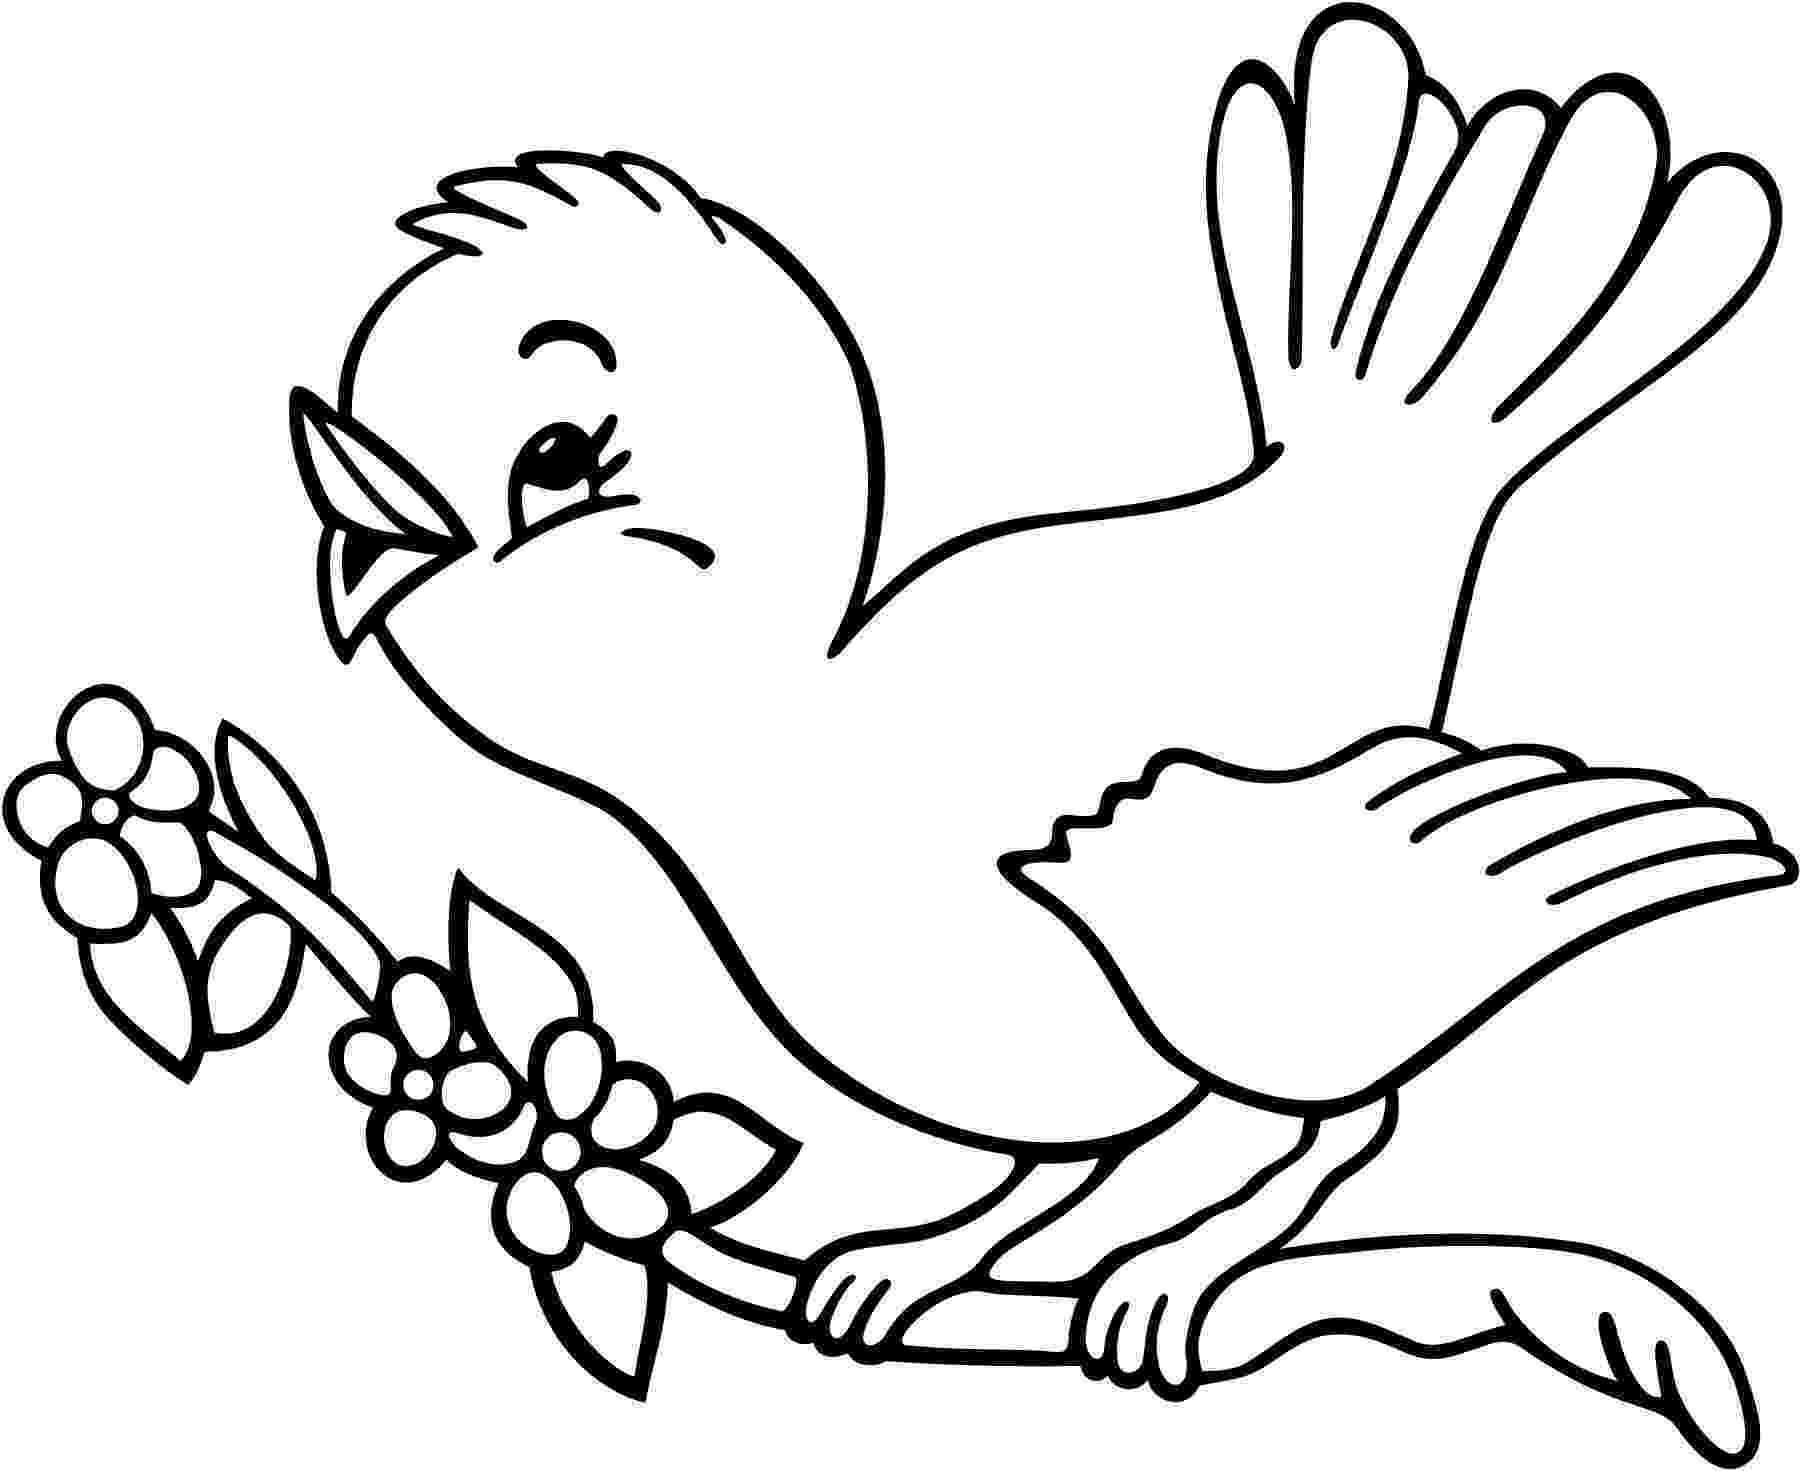 bird color pages new angry birds coloring pages all free coloring page pages color bird 